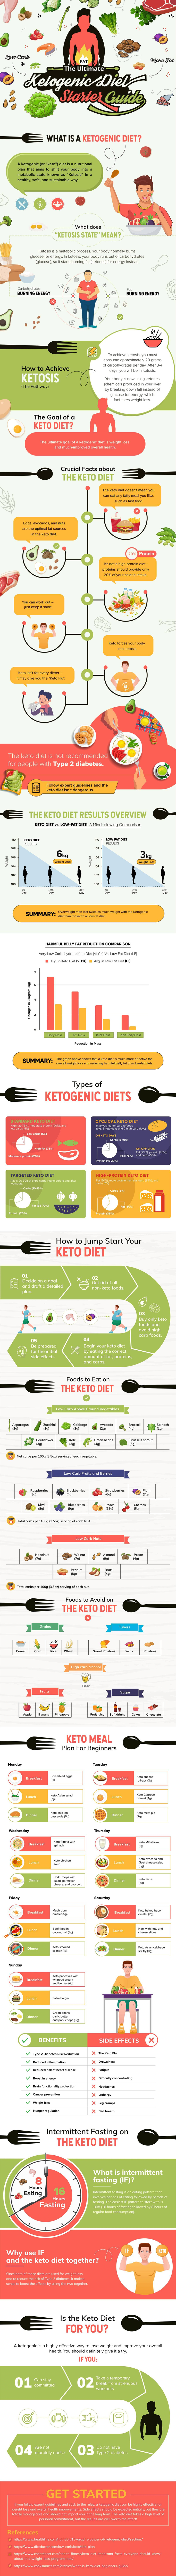 The Ultimate Ketogenic Diet Starter Guide - Infographic